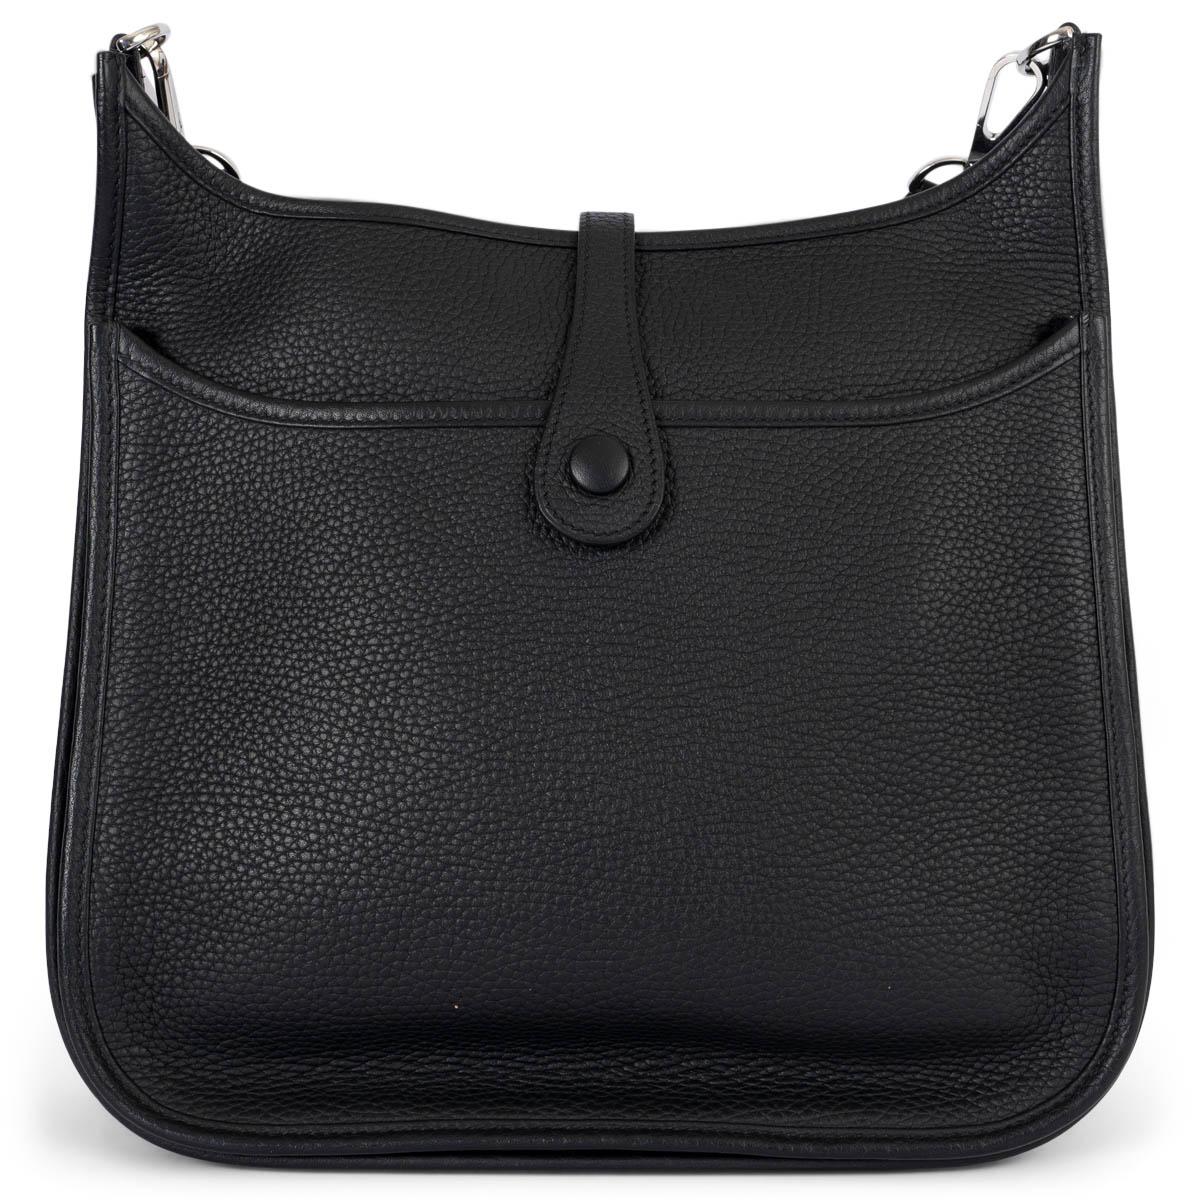 HERMES black Clemence leather EVELYNE lll 29 Crossbody Bag Phw In Excellent Condition For Sale In Zürich, CH